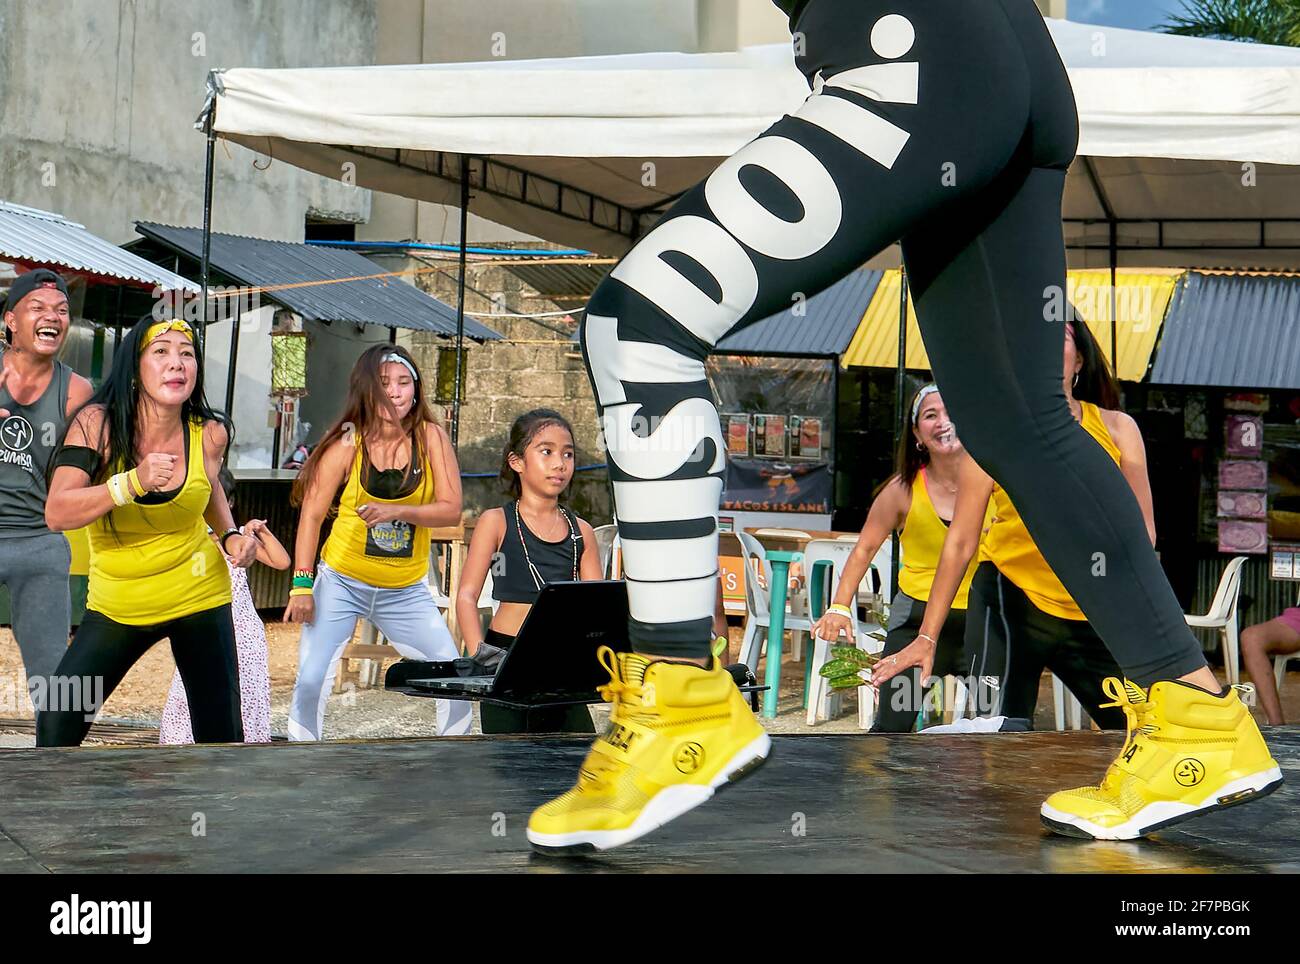 A group of Zumba dancers, all dressed in yellow sports wear, exercising happily in front of a female instructor on a stage, Boracay Island, Asia Stock Photo